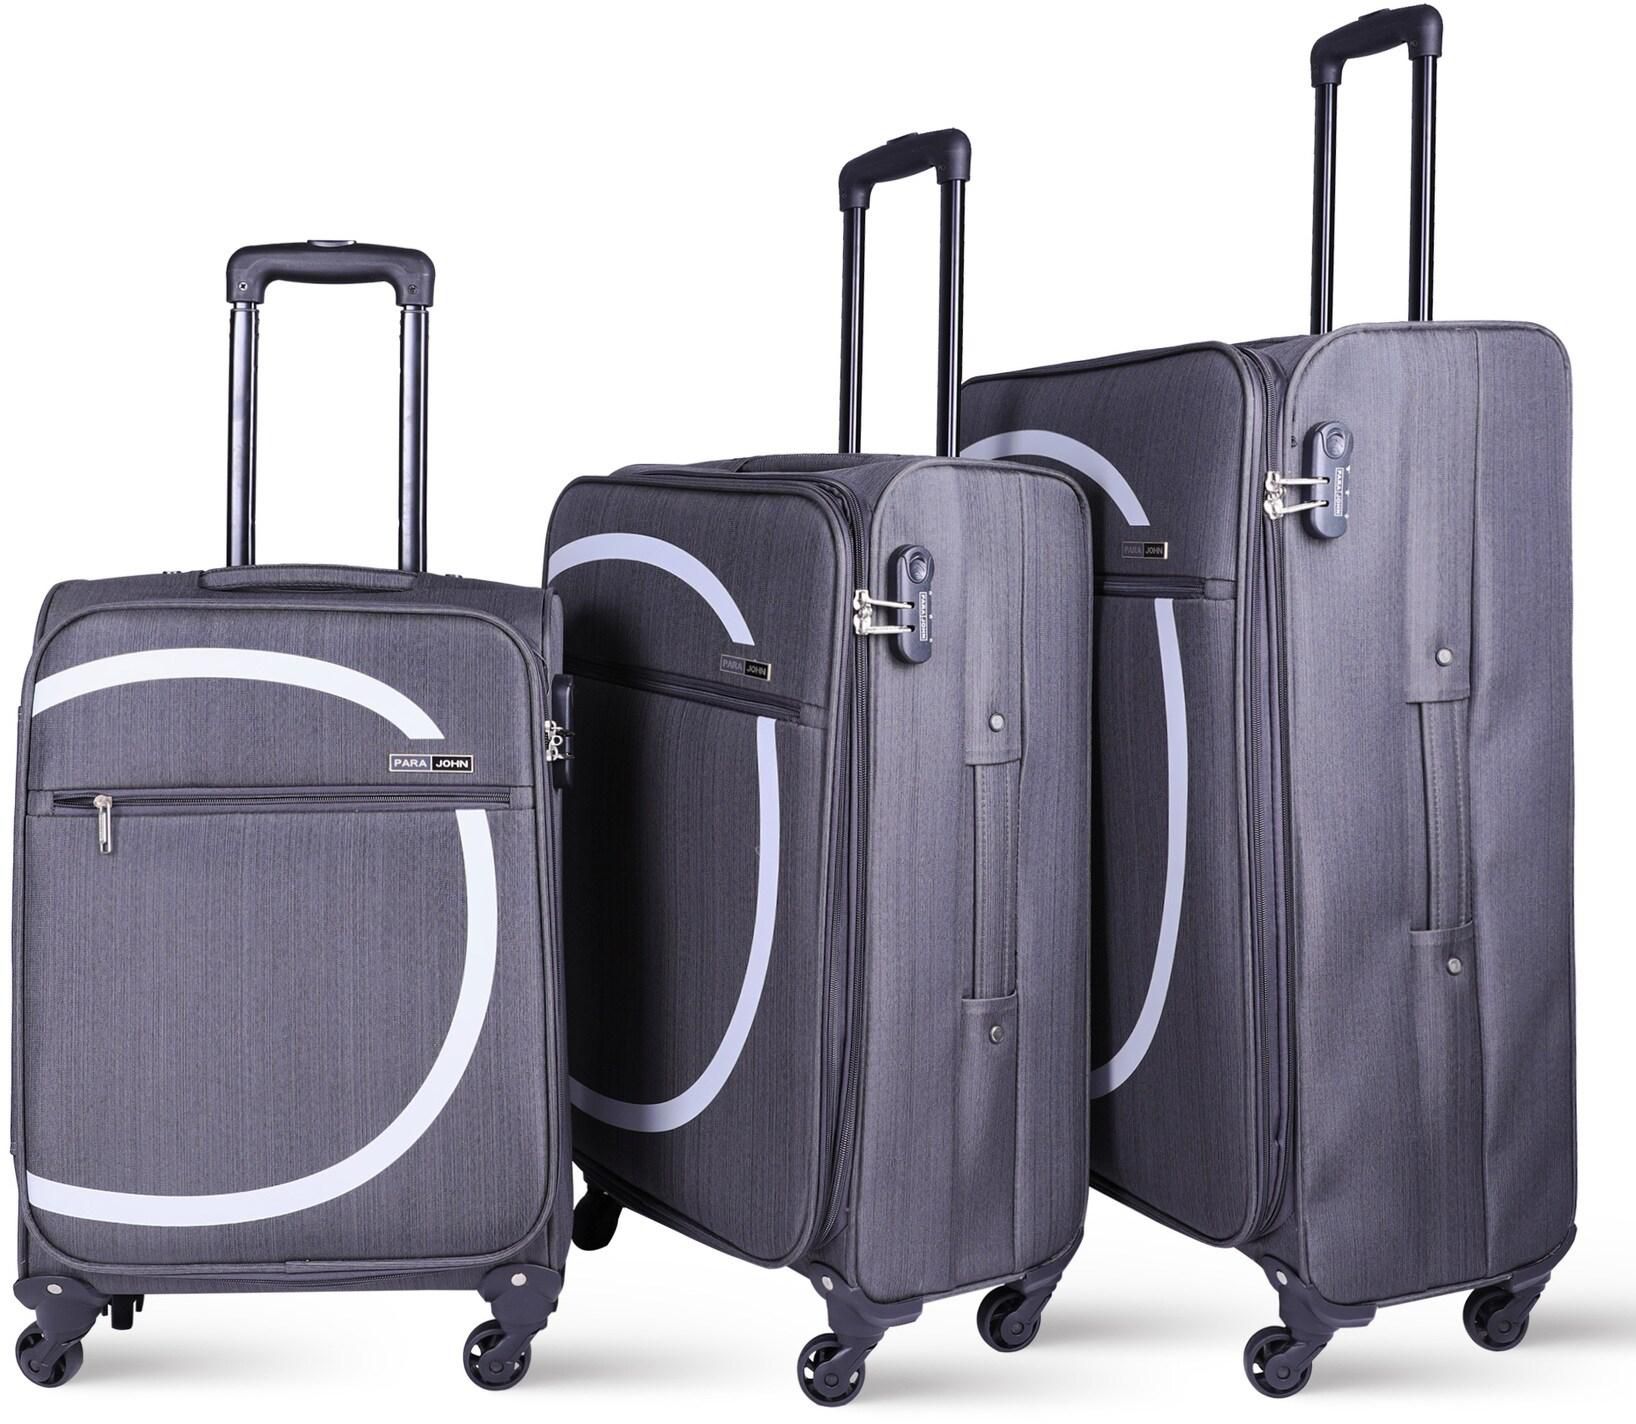 Para John Travel Luggage Suitcase, Set Of 3 - Trolley Bag, Carry On Hand Cabin Luggage Bag - Lightweight Travel Bags With 360 Durable 4 Spinner Wheels - Soft Shell Luggage Spinner